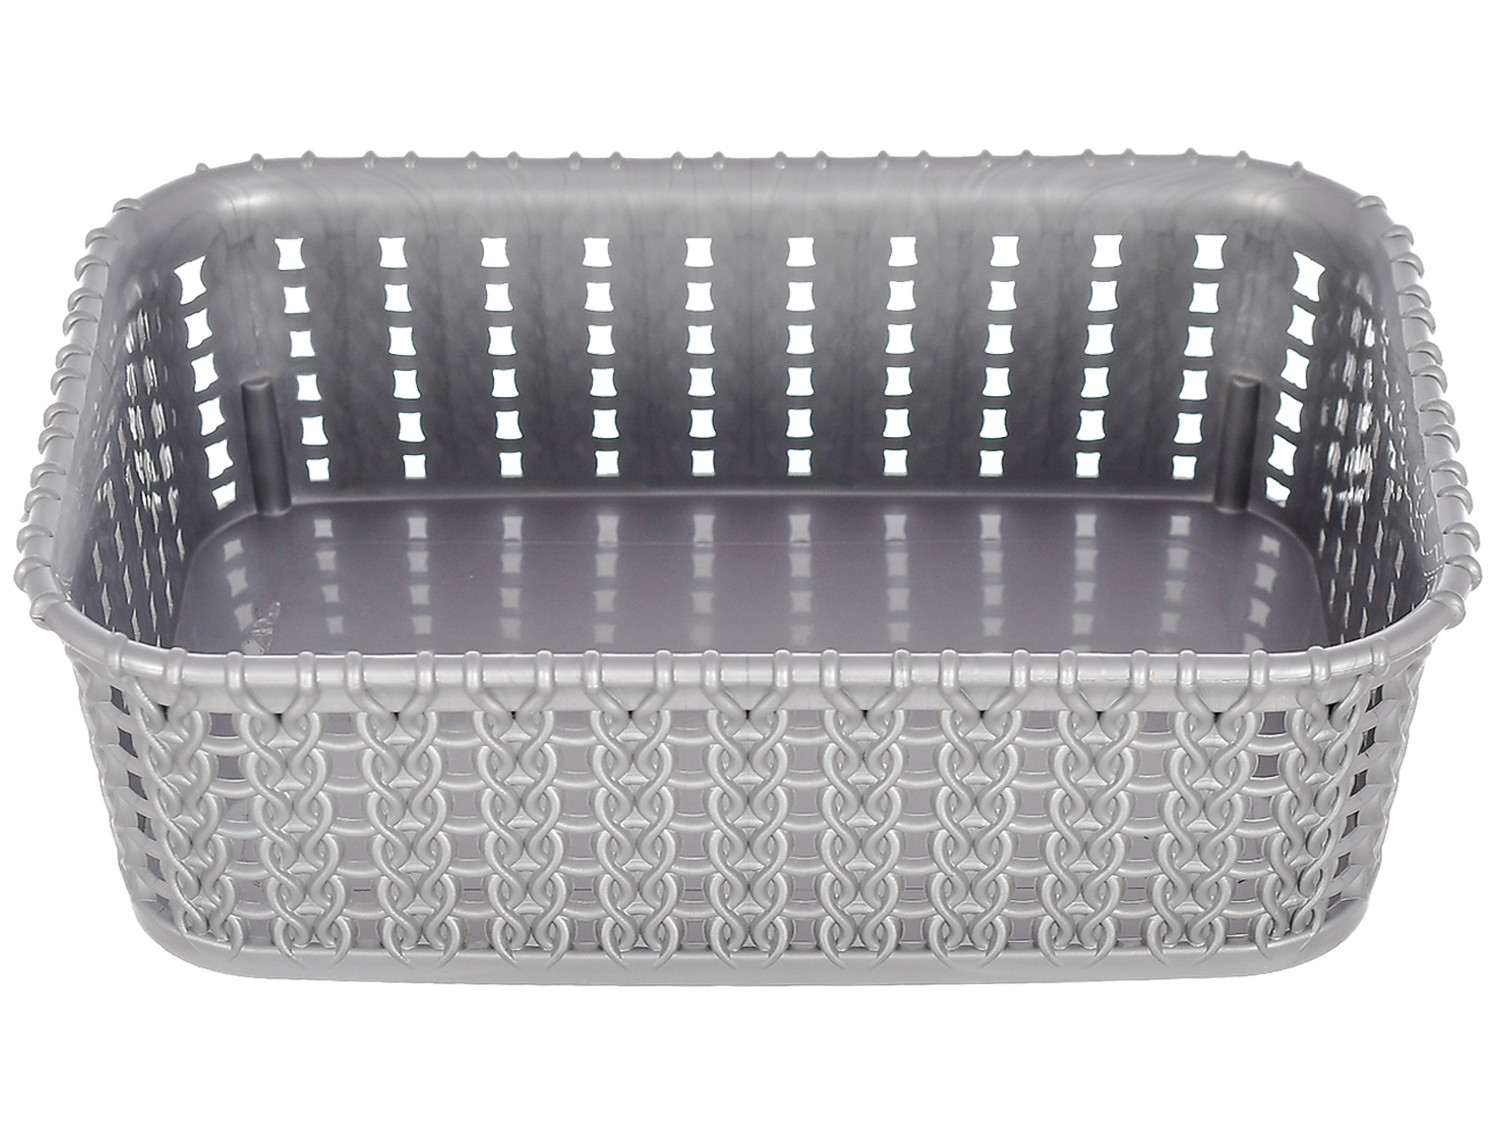 Kuber Industries Multiuses Small M 15 Plastic Tray/Basket/Organizer Without Lid- Pack of 3 (Brown & Grey & Brown) -46KM0129